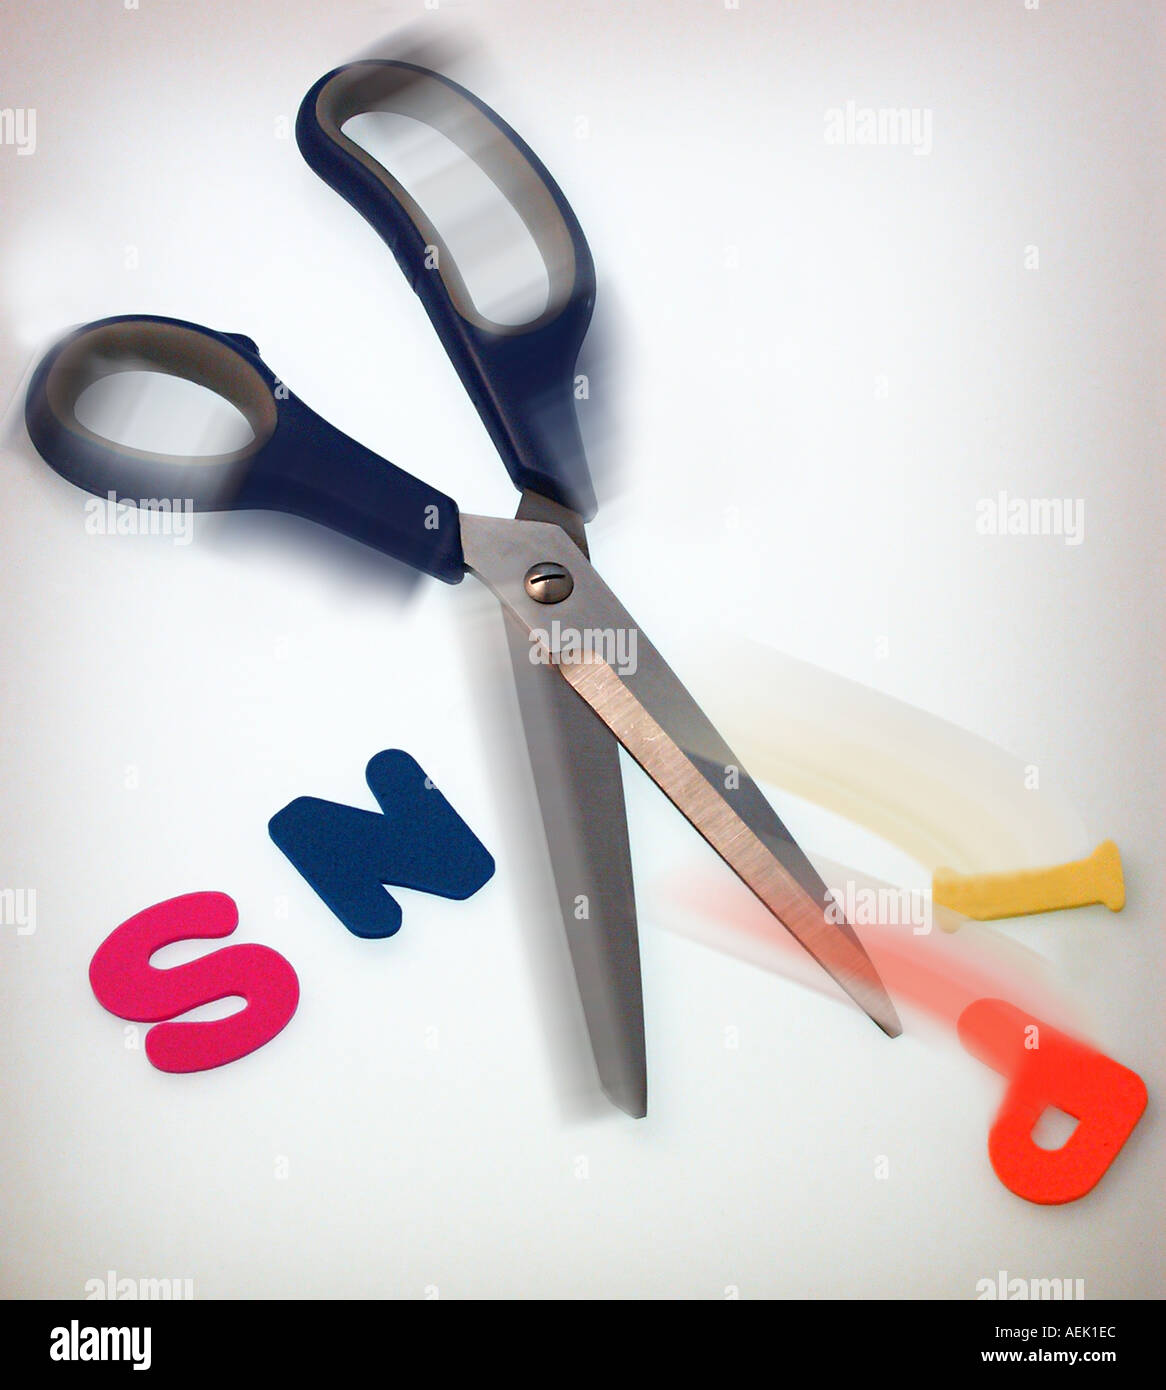 Snip with motion blur Stock Photo